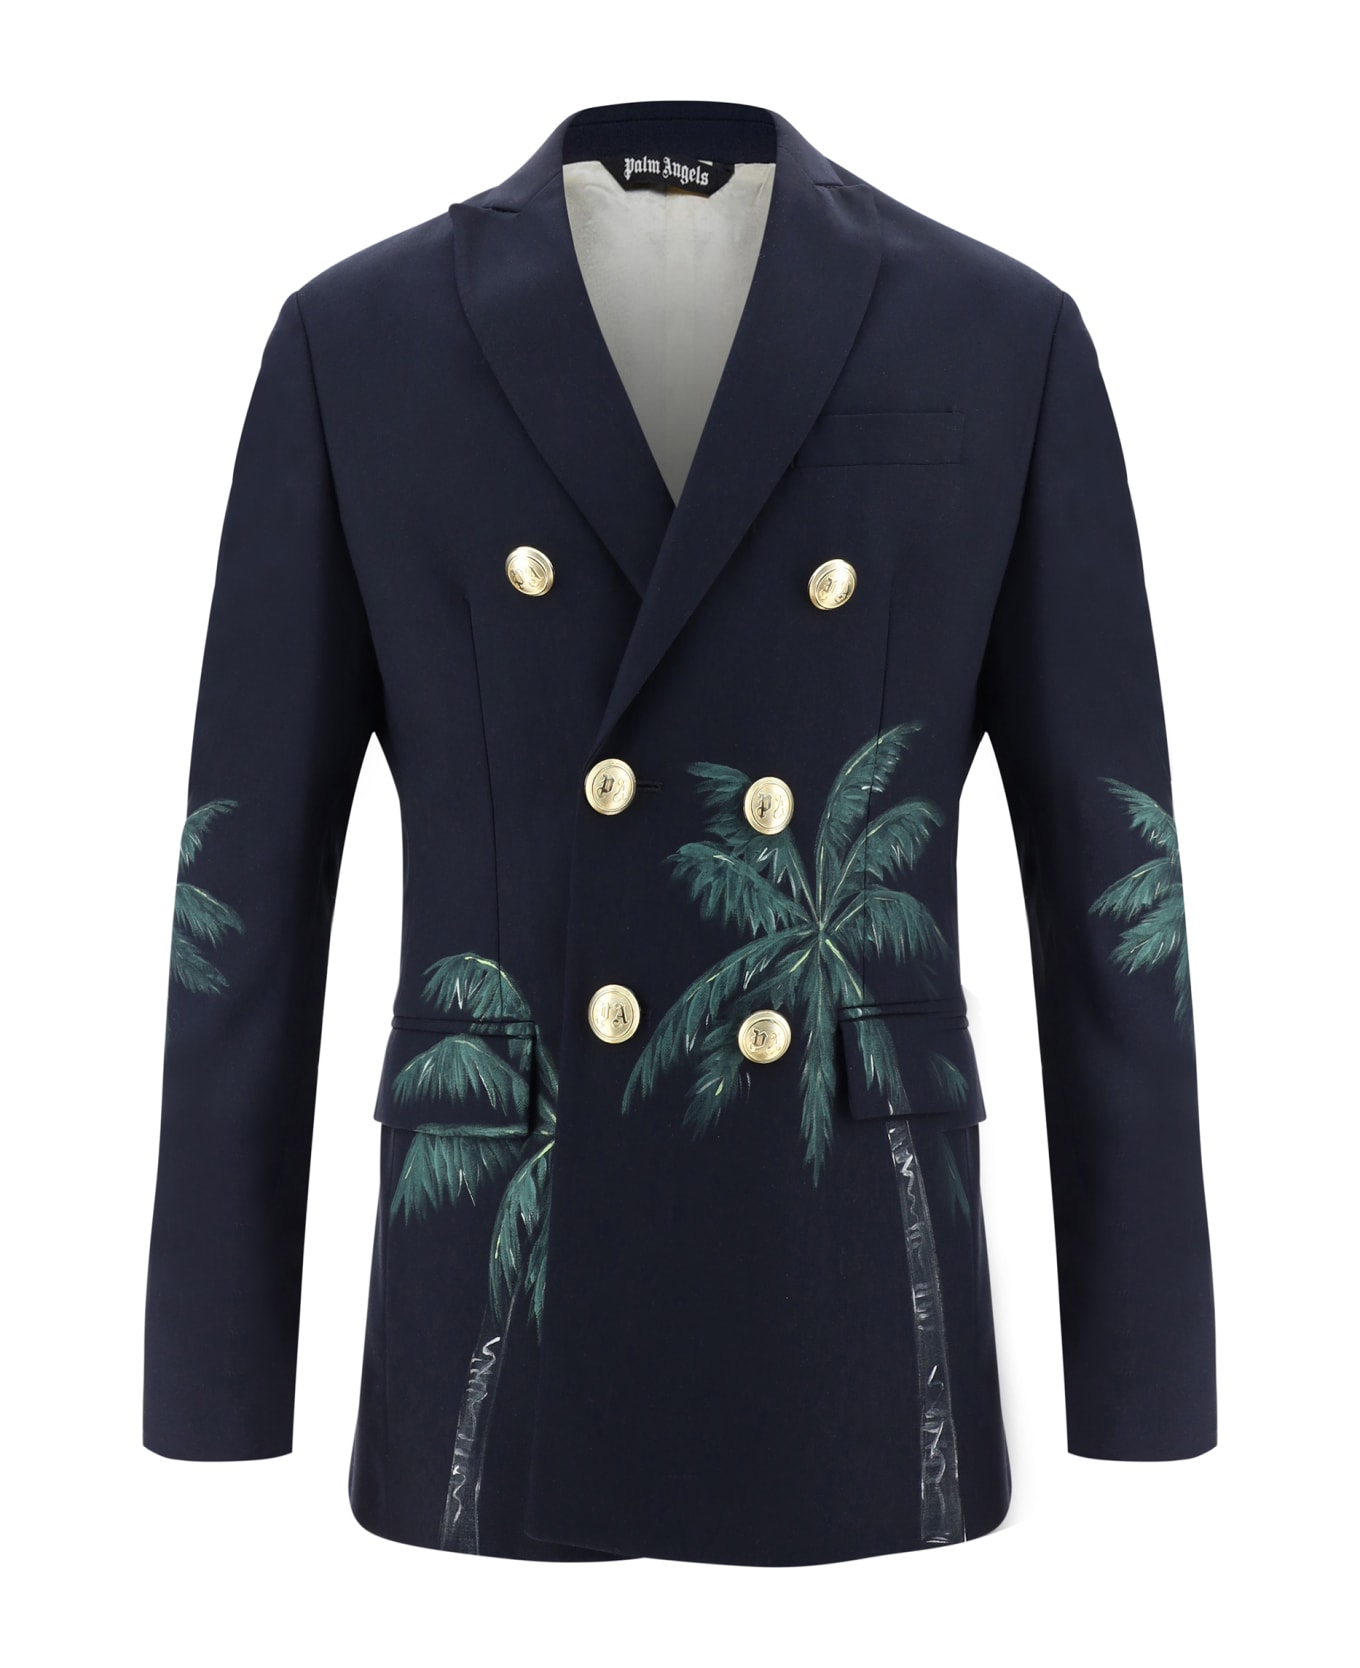 Palm Angels Double-breasted Blazer - Blue コート